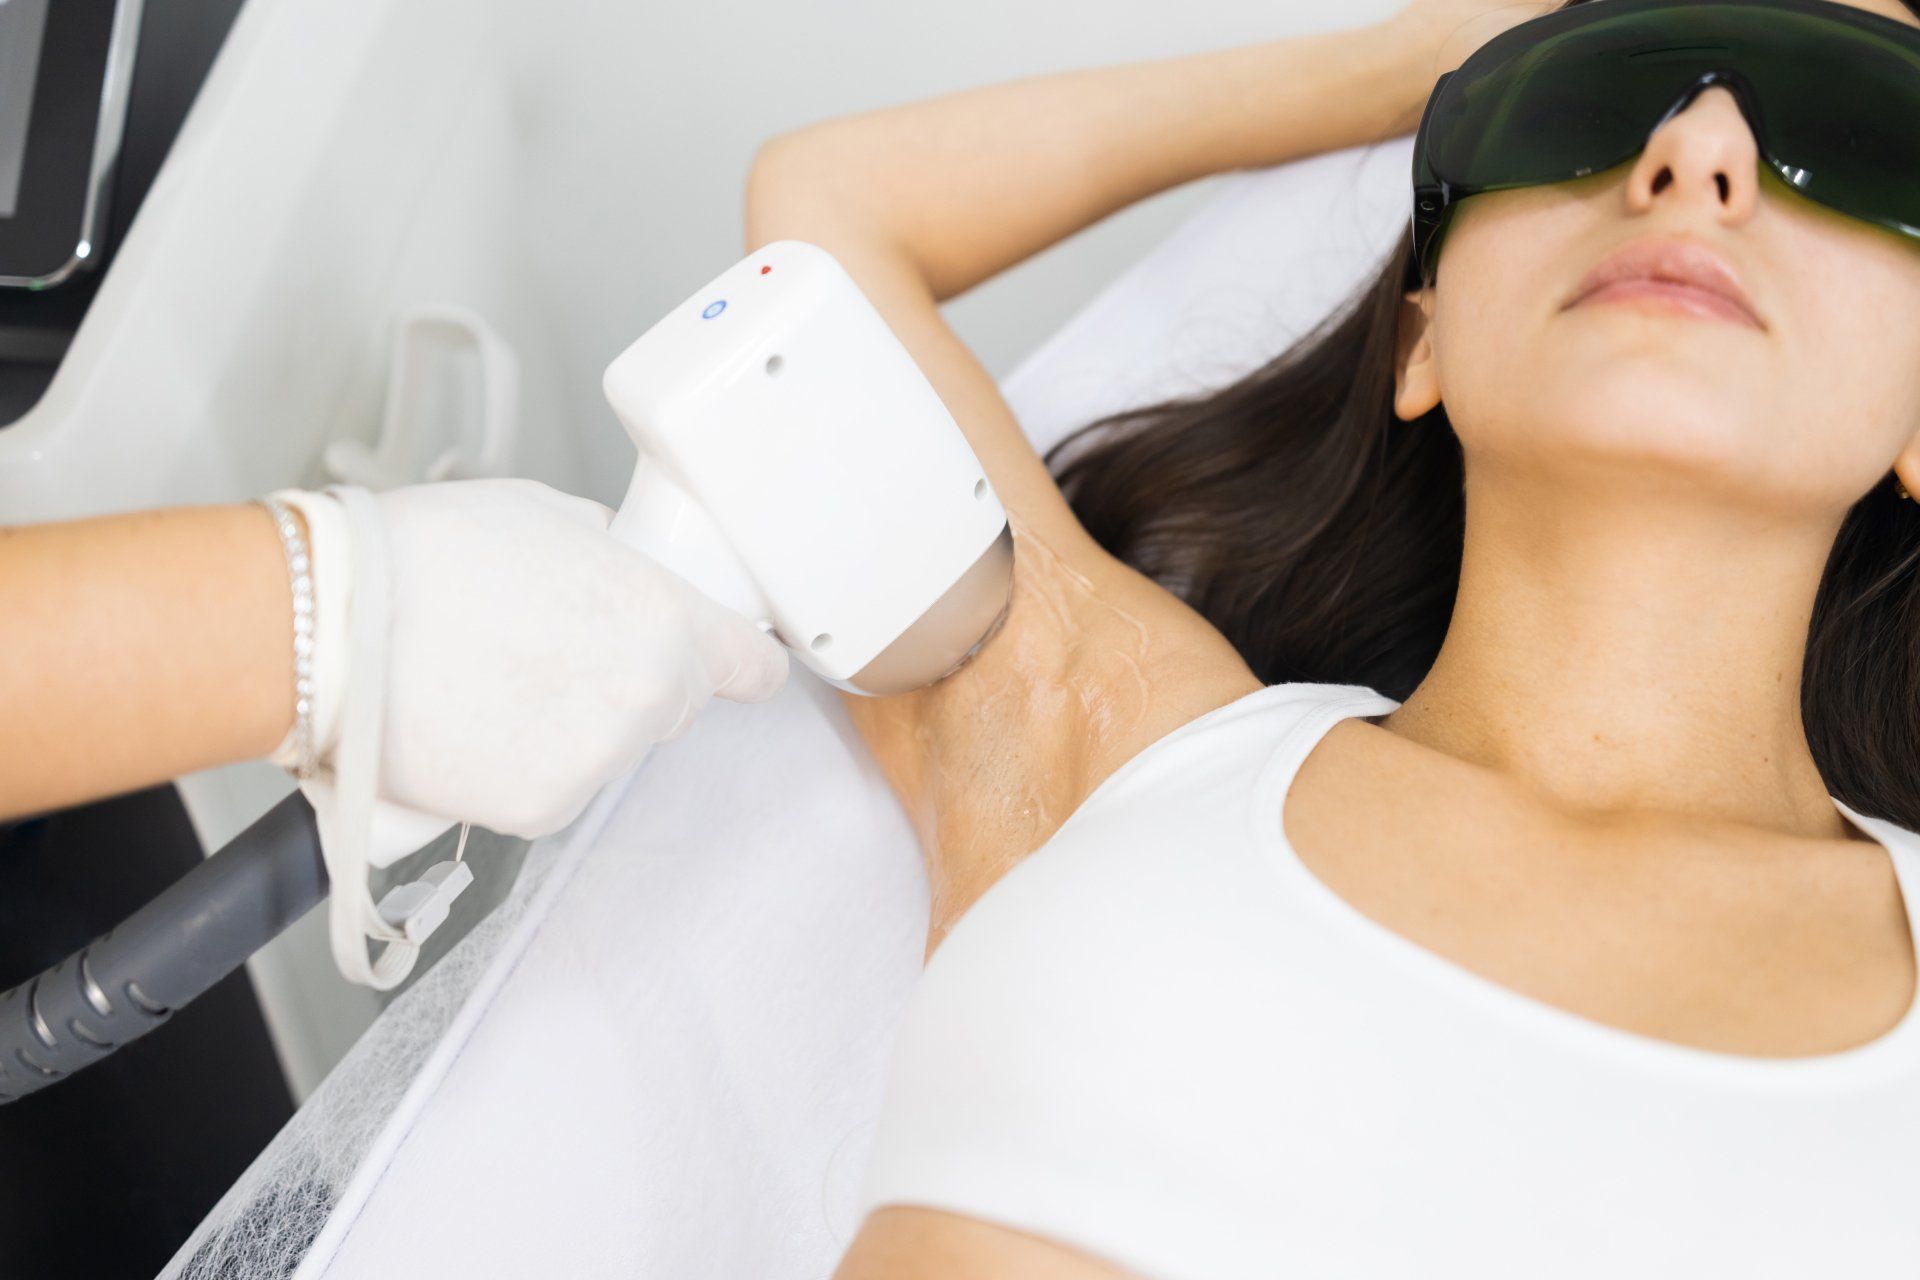 Woman receives laser hair removal treatment on underarm